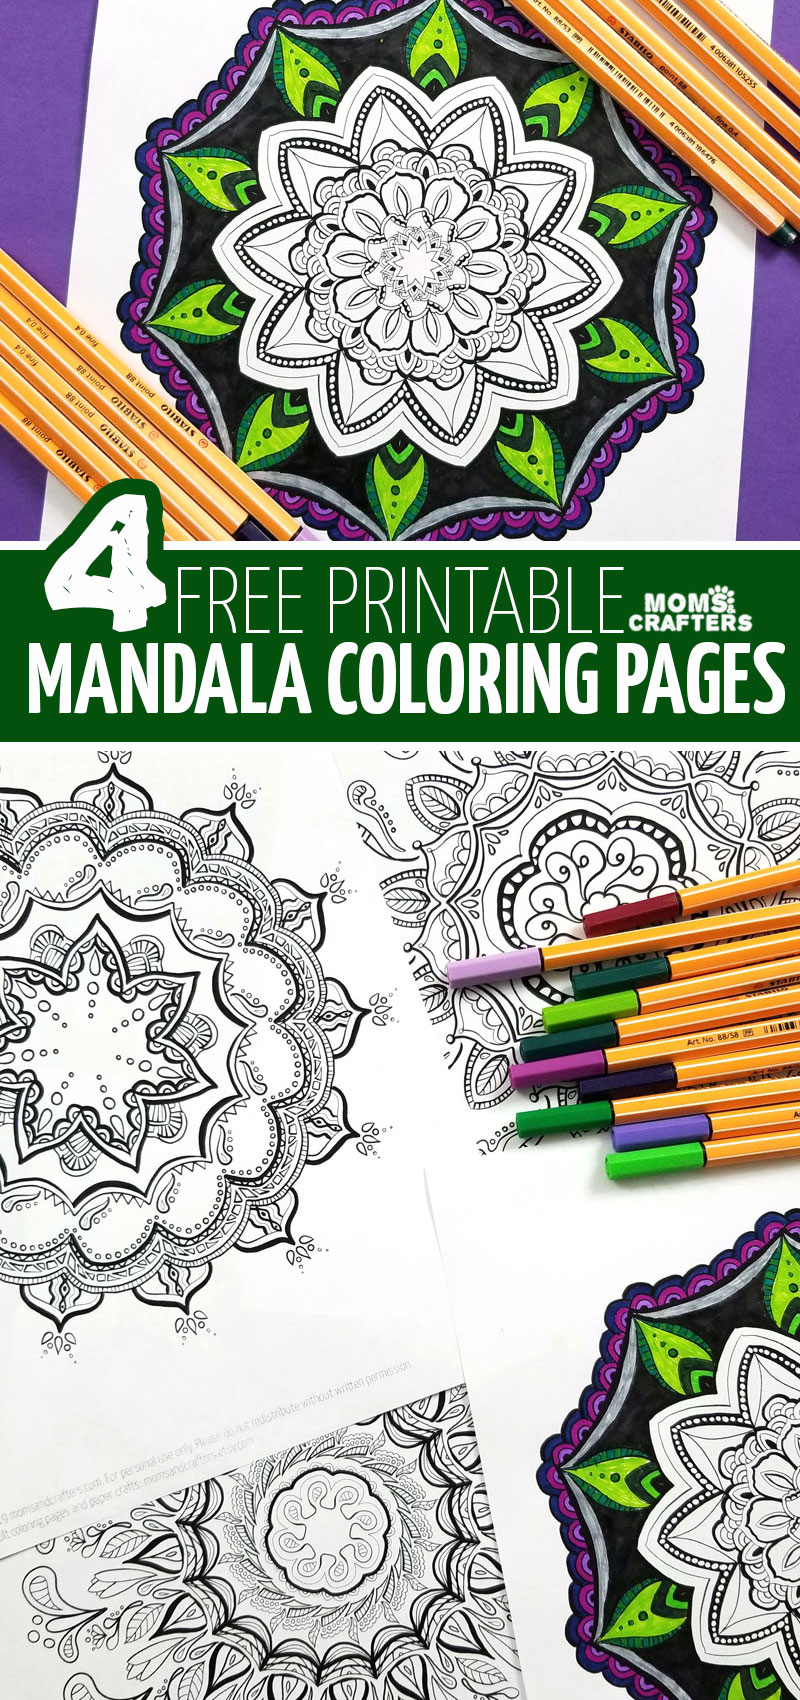 Download Free Printable Mandala Coloring Pages For Adults Moms And Crafters